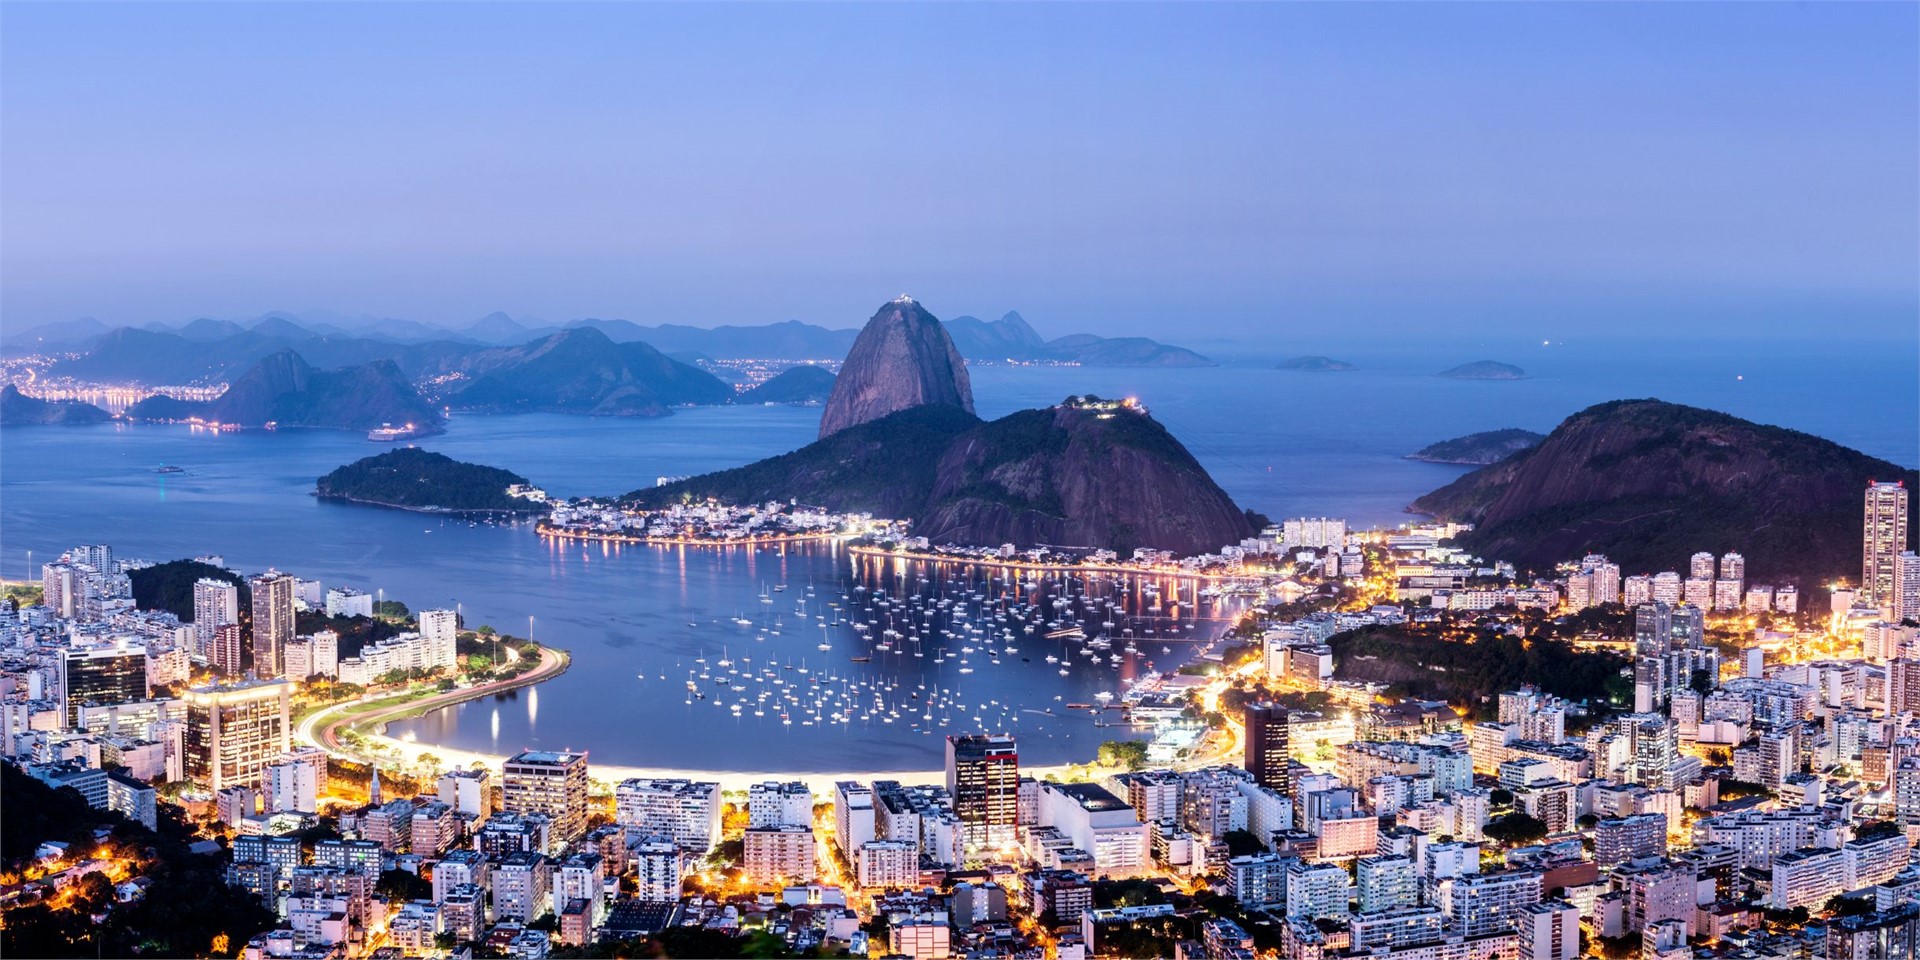 Hotels and accommodation in Rio de Janeiro, Brazil
